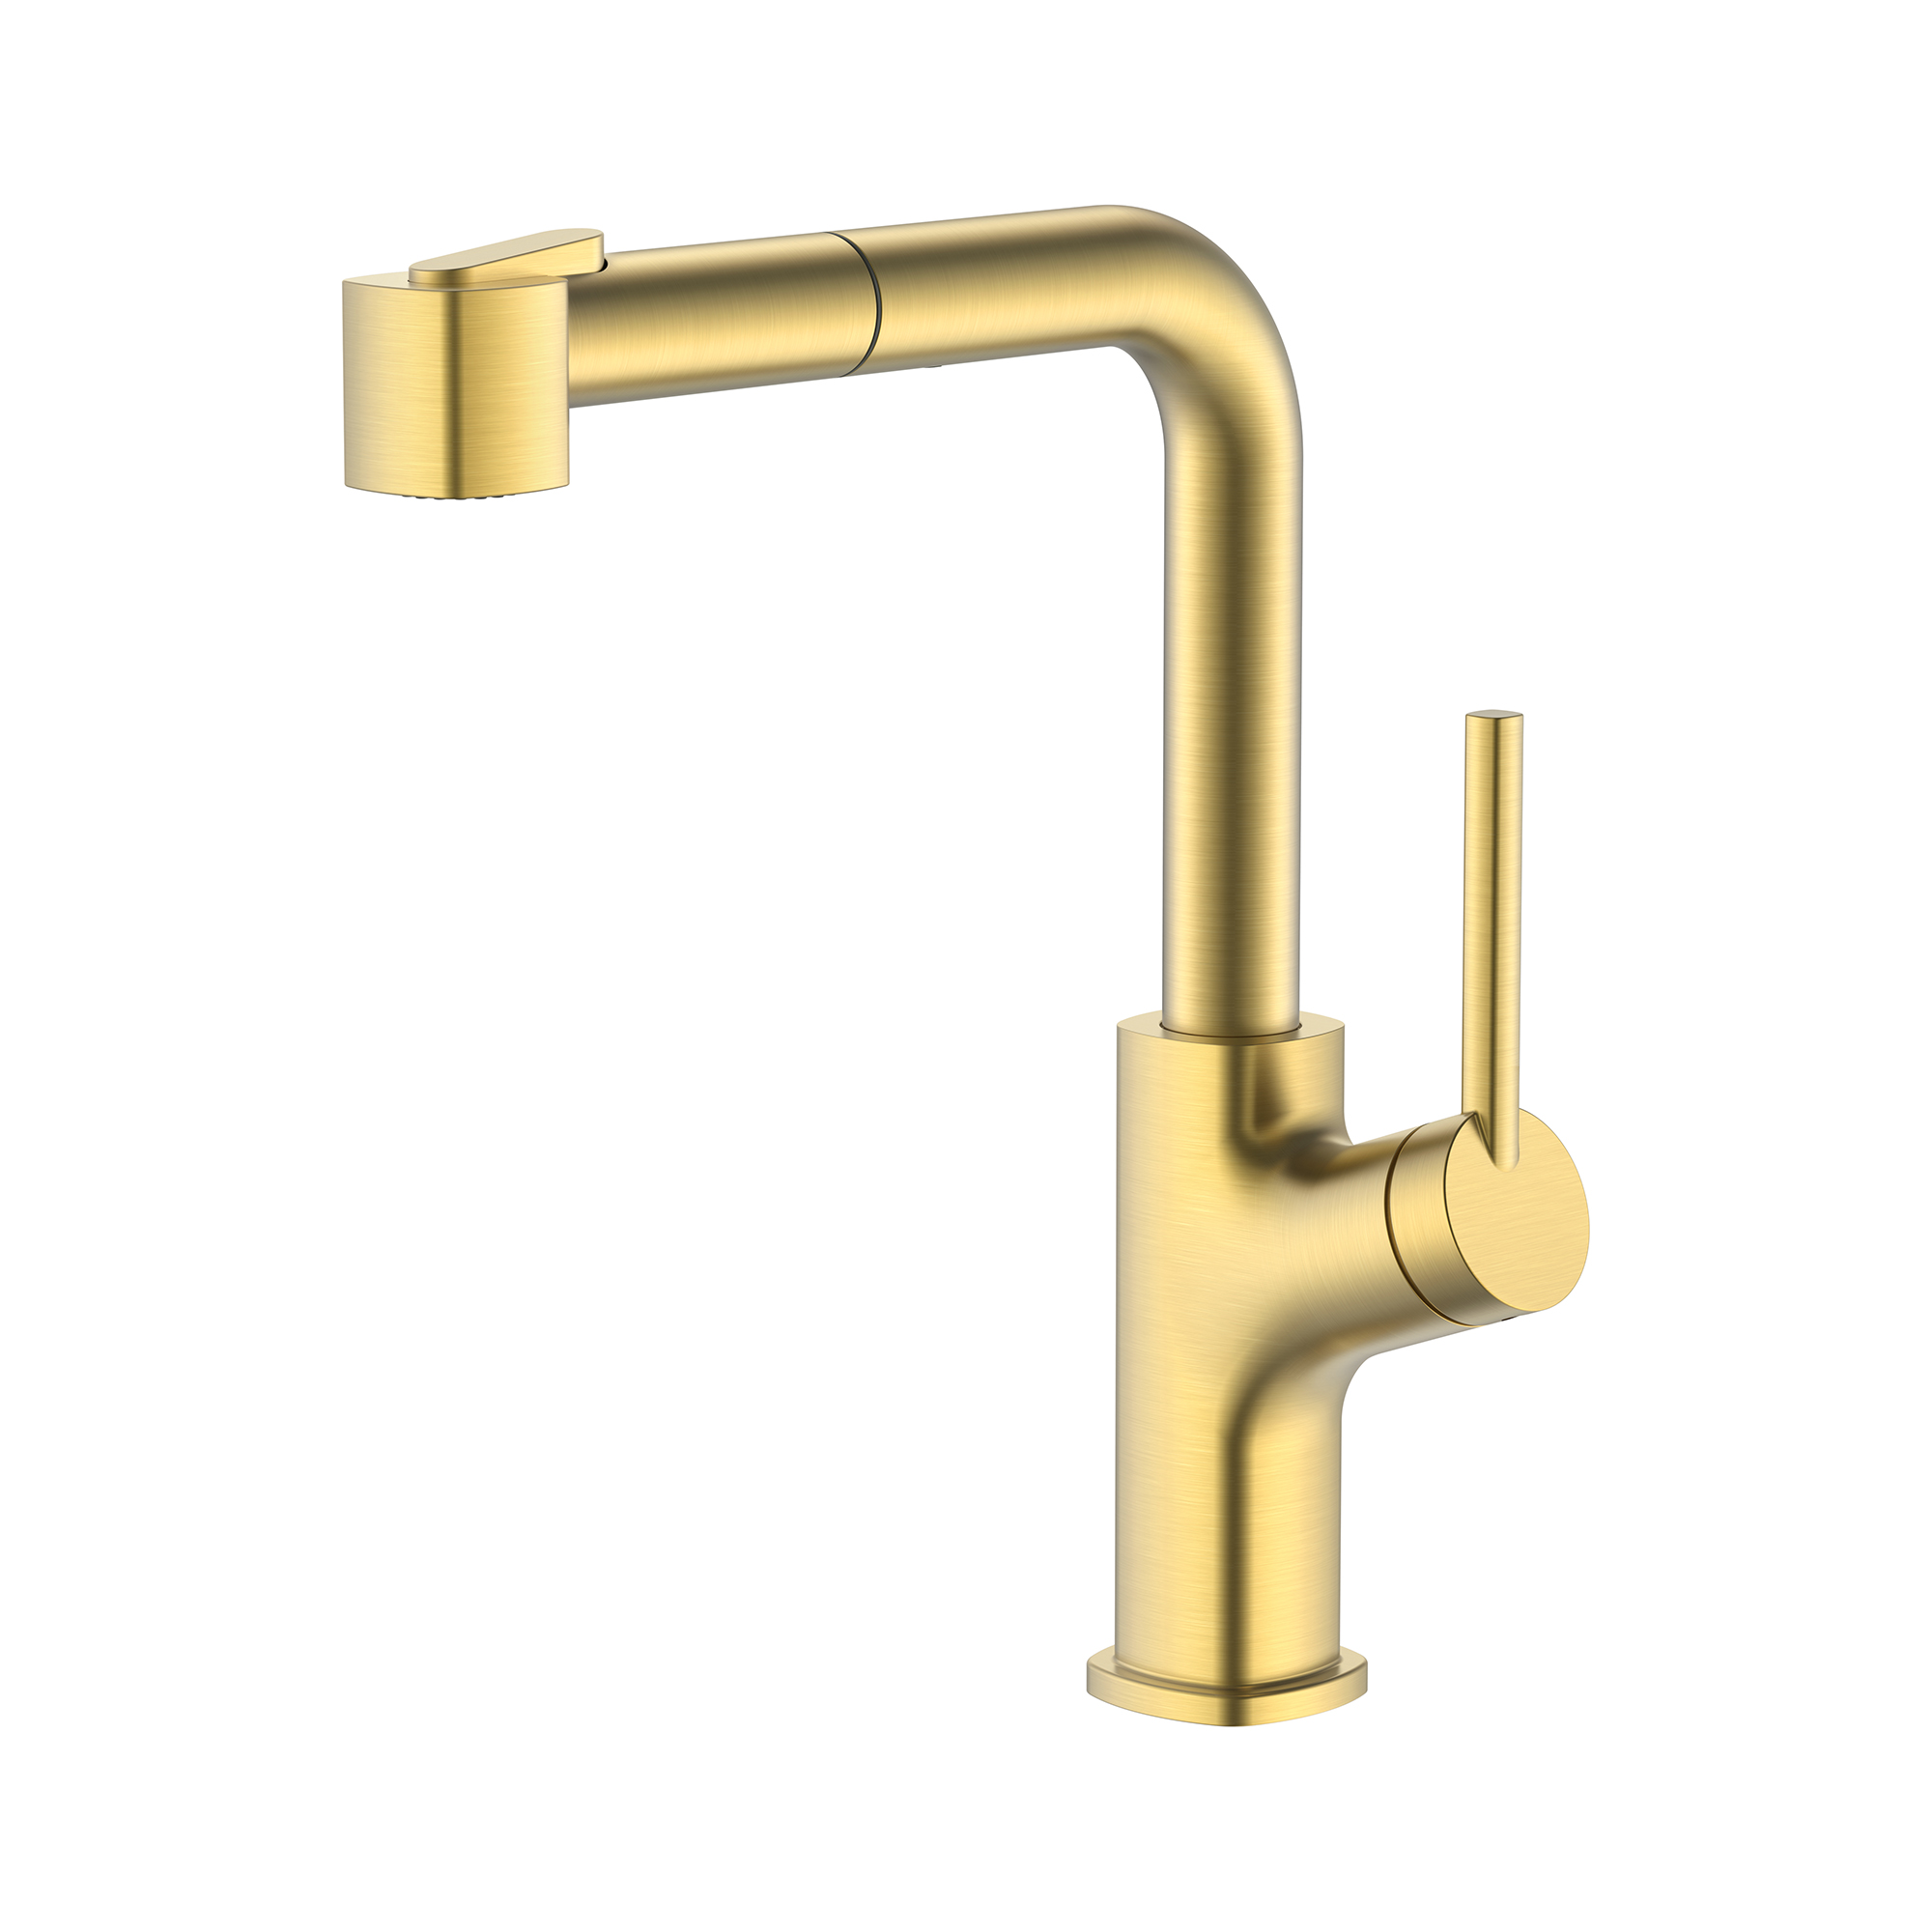 Add a Modern Touch to Your Kitchen With a Gold/Brushed Nickel Kitchen Faucet